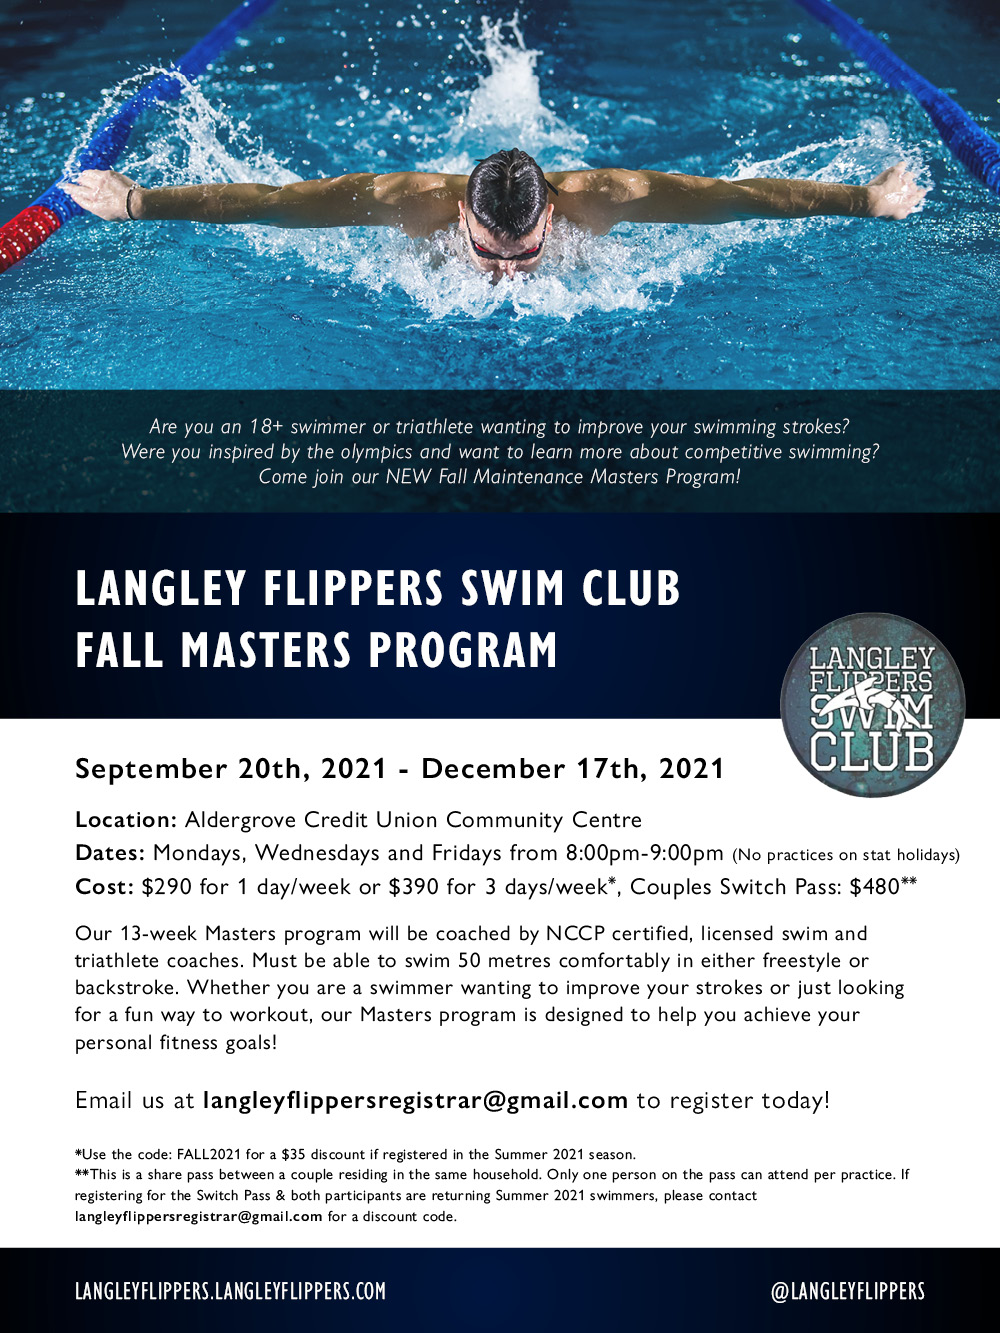 The flyer created for promotion of their 2021 Fall Masters Program.